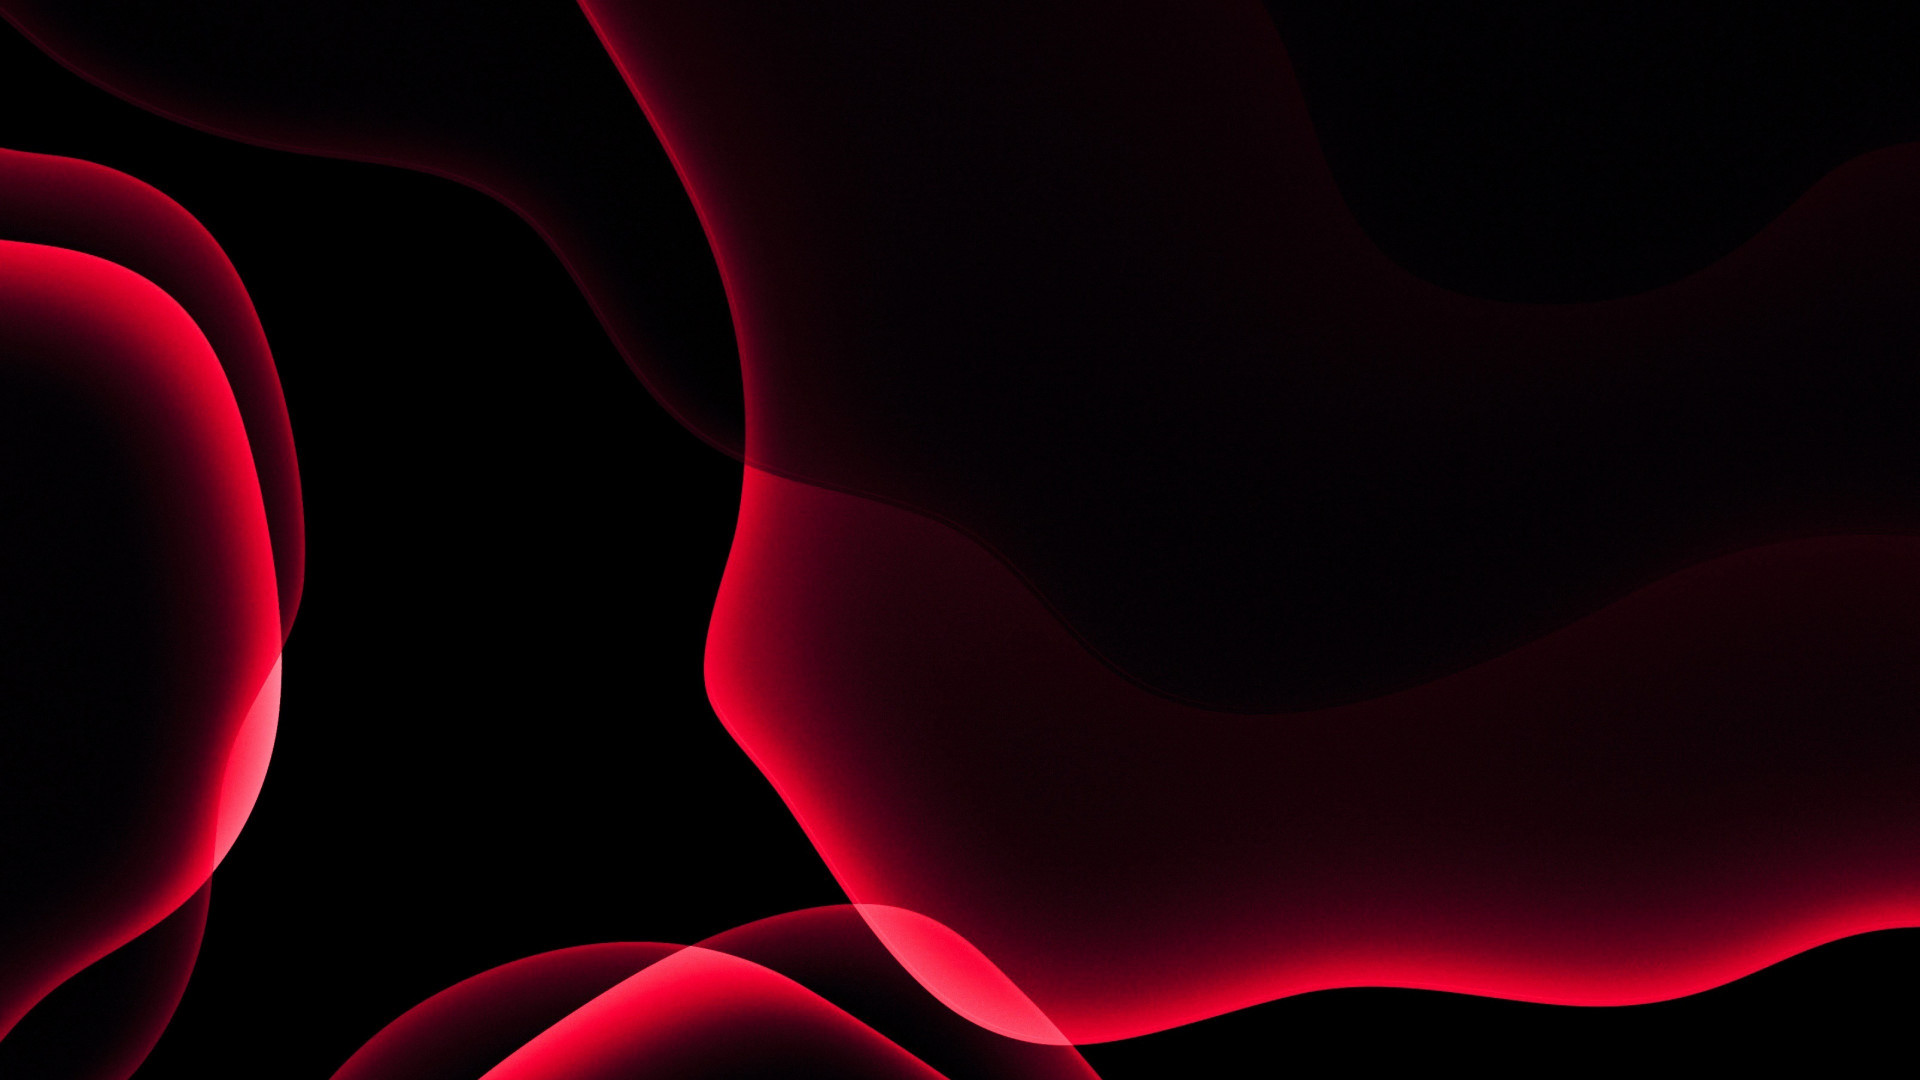 Download wallpaper iOS 13 red abstract 1920x1080